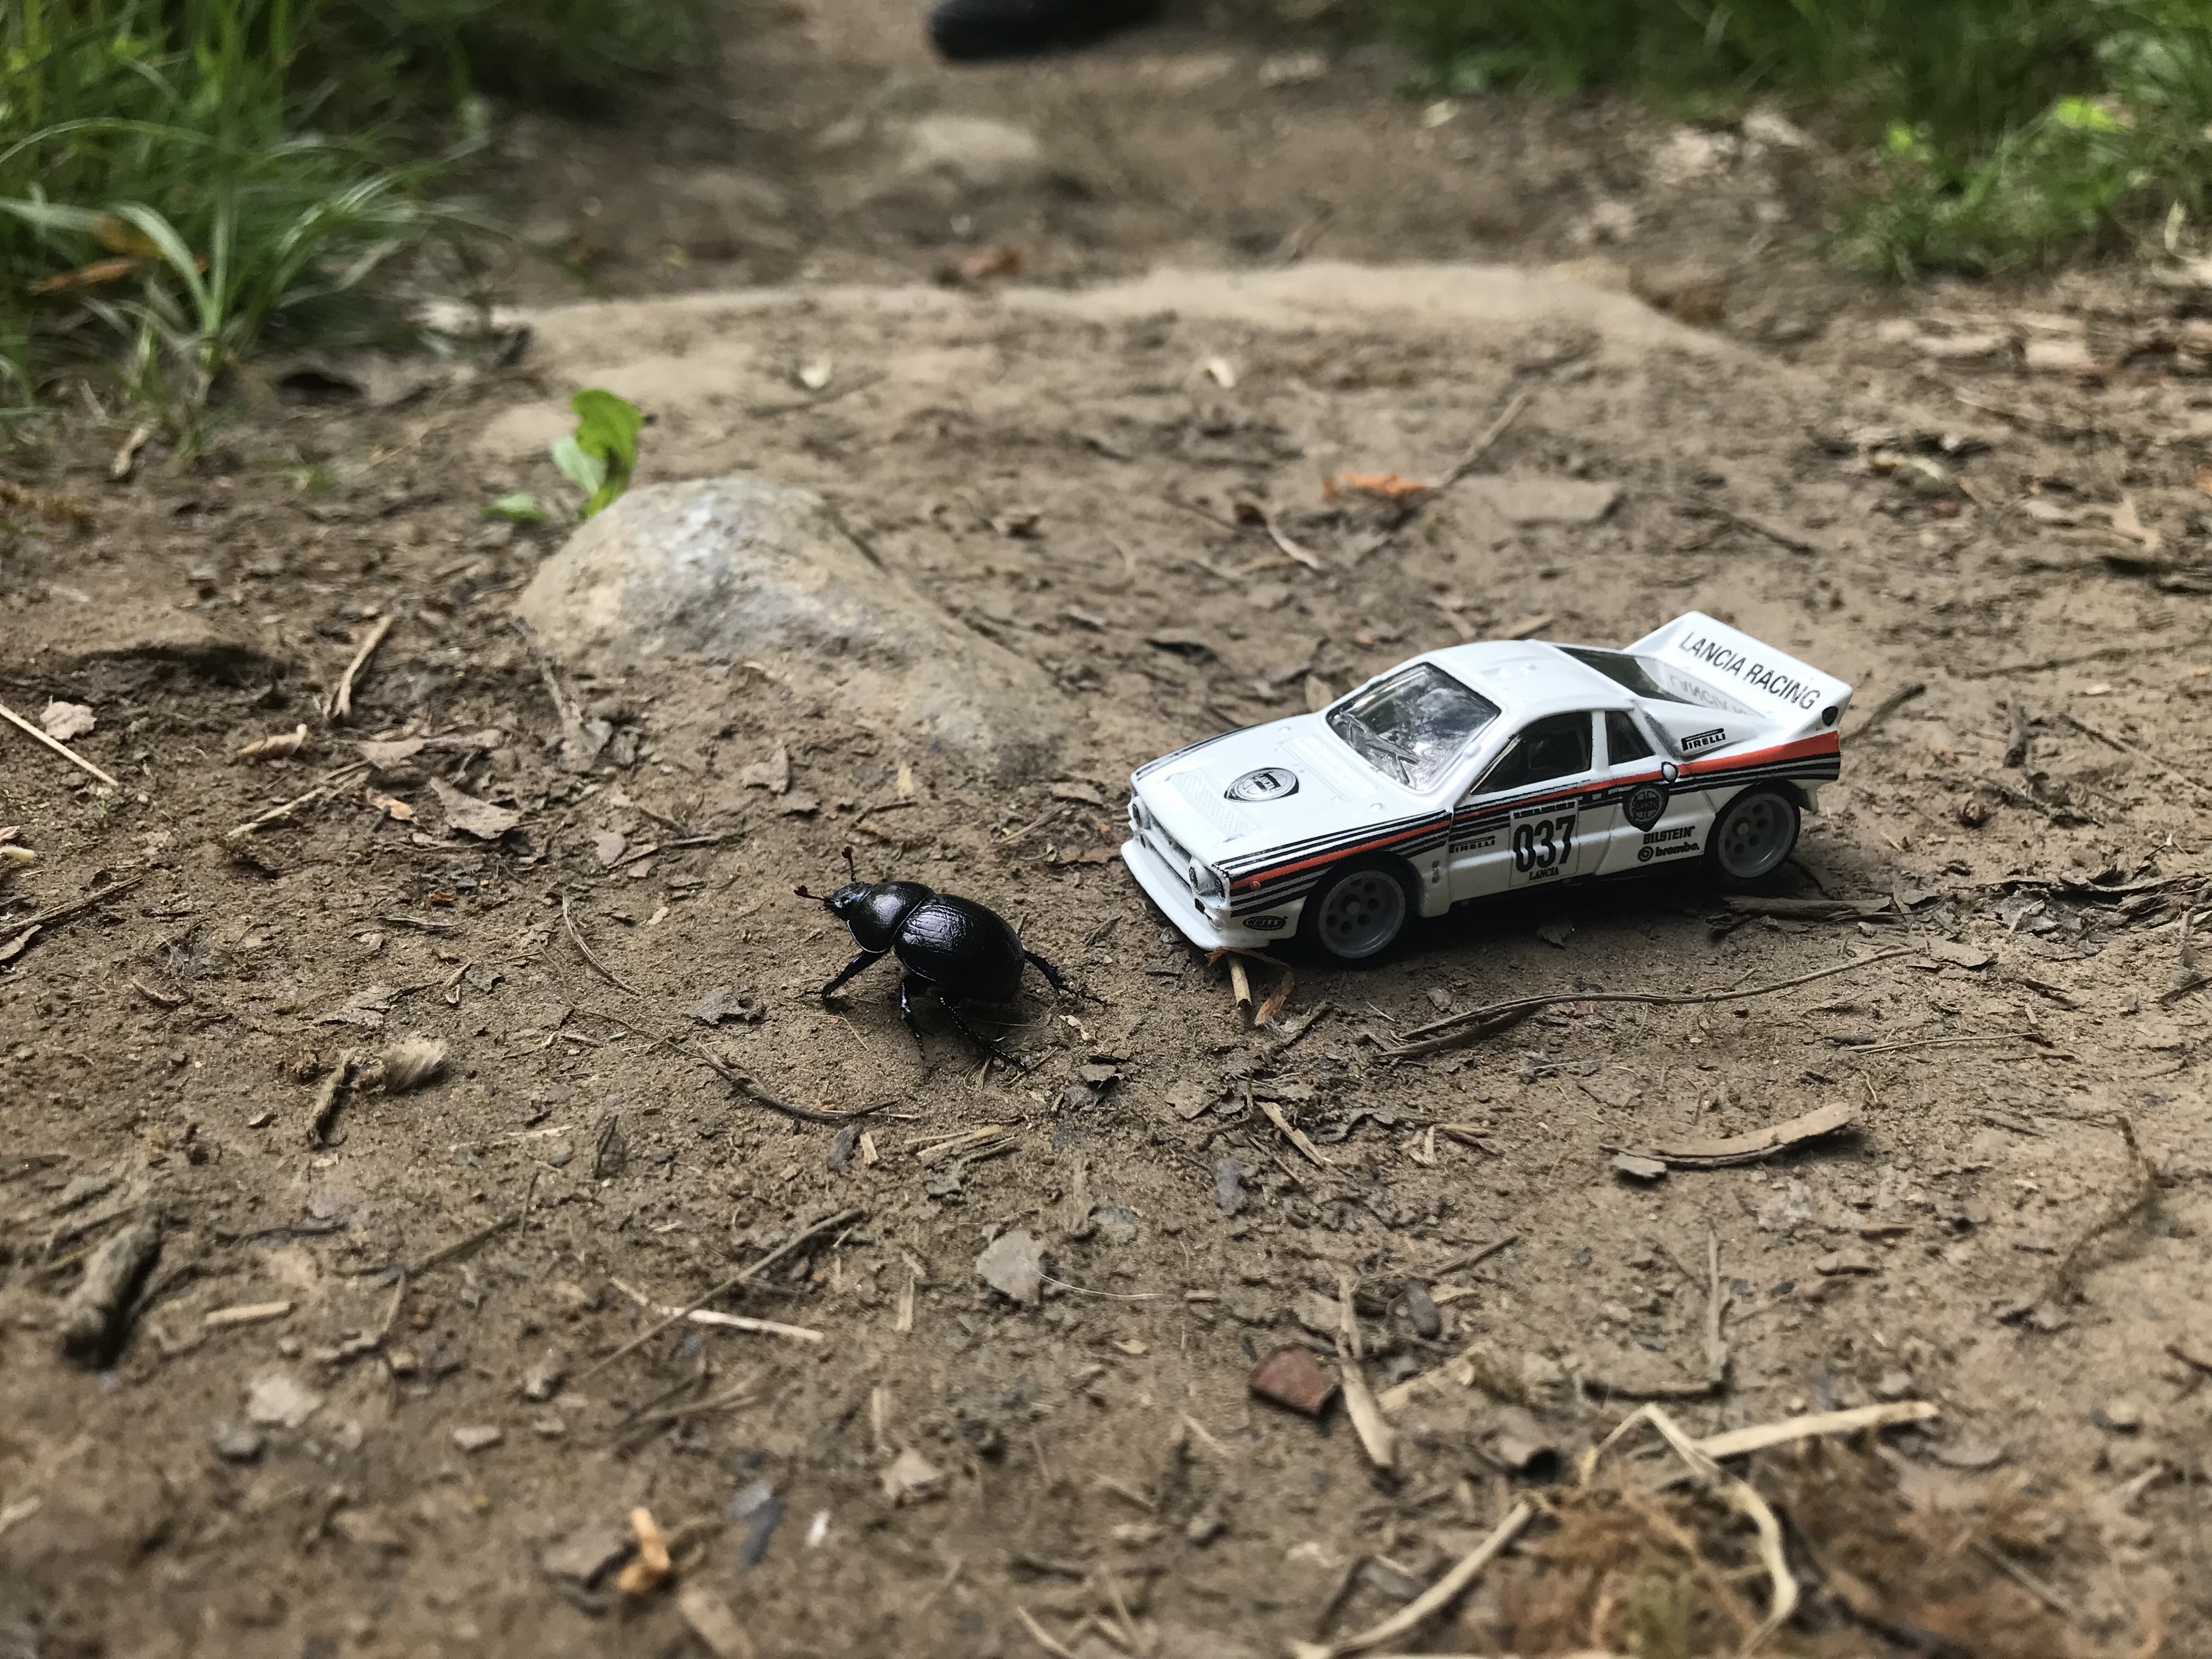 Hotwheels Grp B Rally Lancia 037 on a dirt path. A beetle about 1/3 the size of the car is nearby [XOR37H - Alchemy Mindworks Productskg]